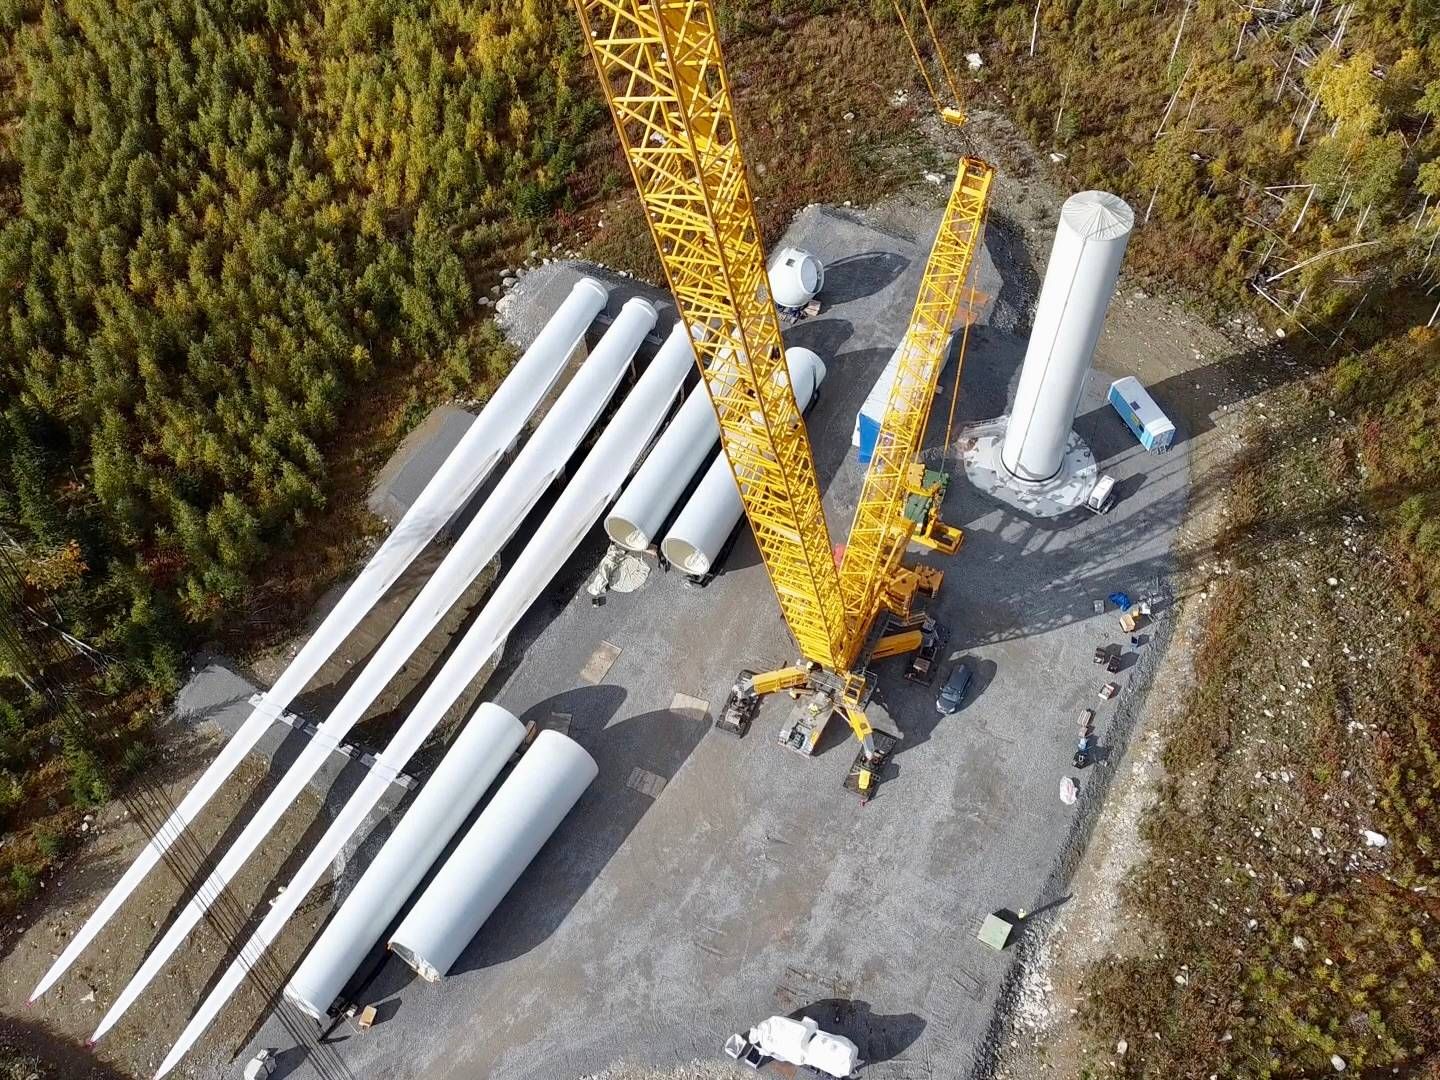 Image from the construction of a previously built wind farm in Sweden, Björnberget | Photo: Claviate / Pr